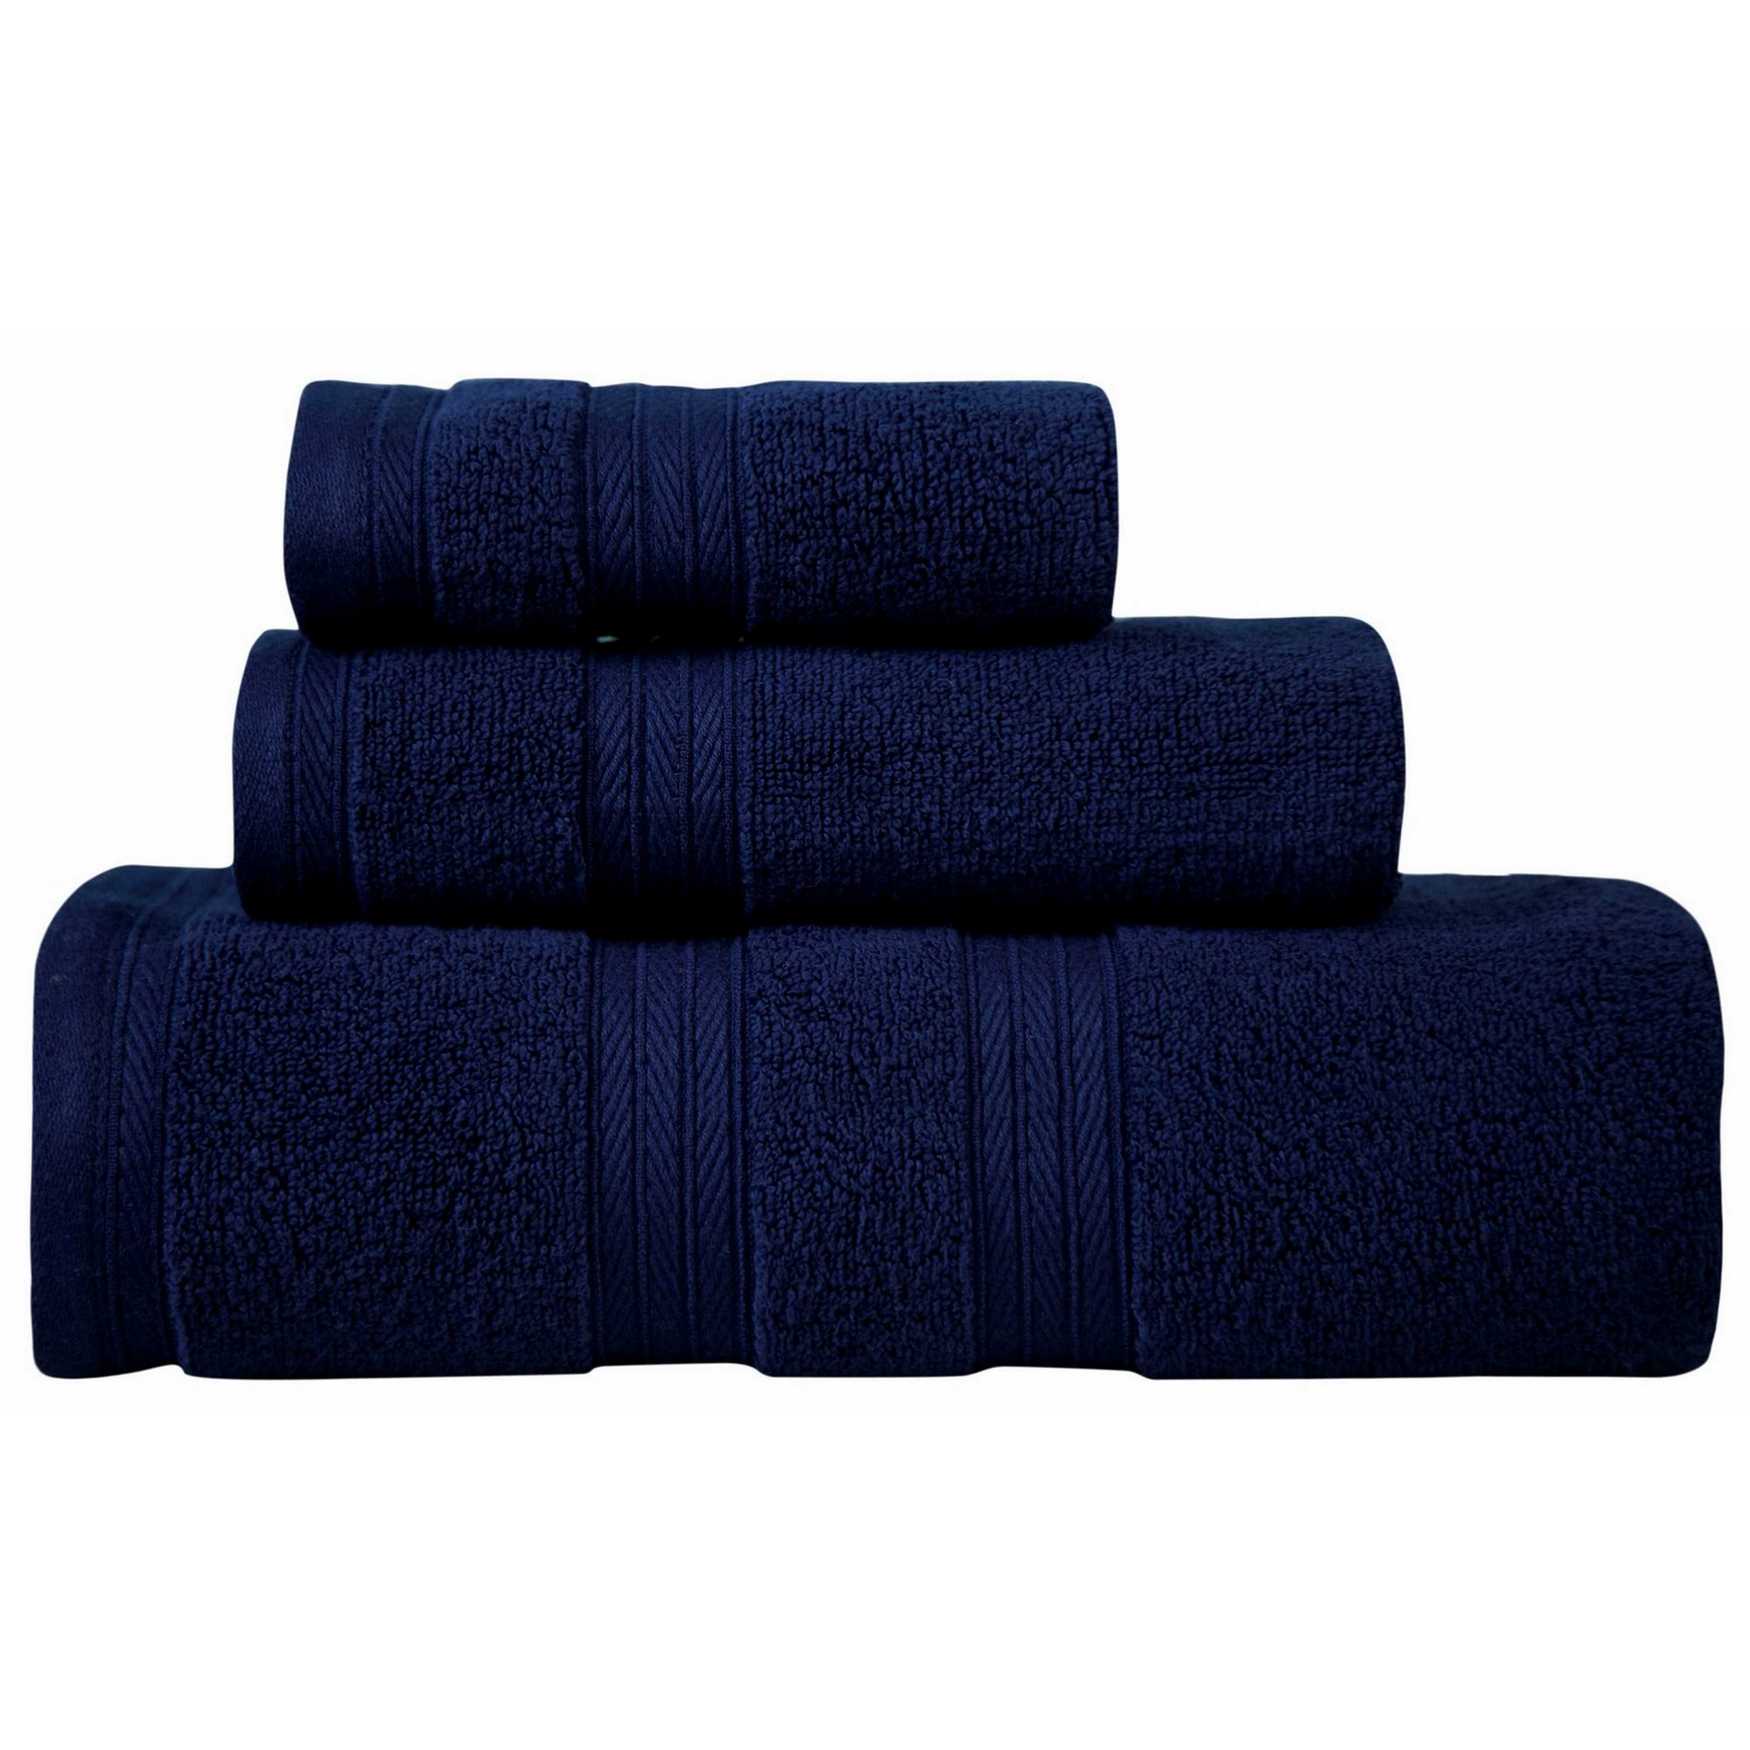 Waterford 3 Piece Bath Rug and Towel Collection, 